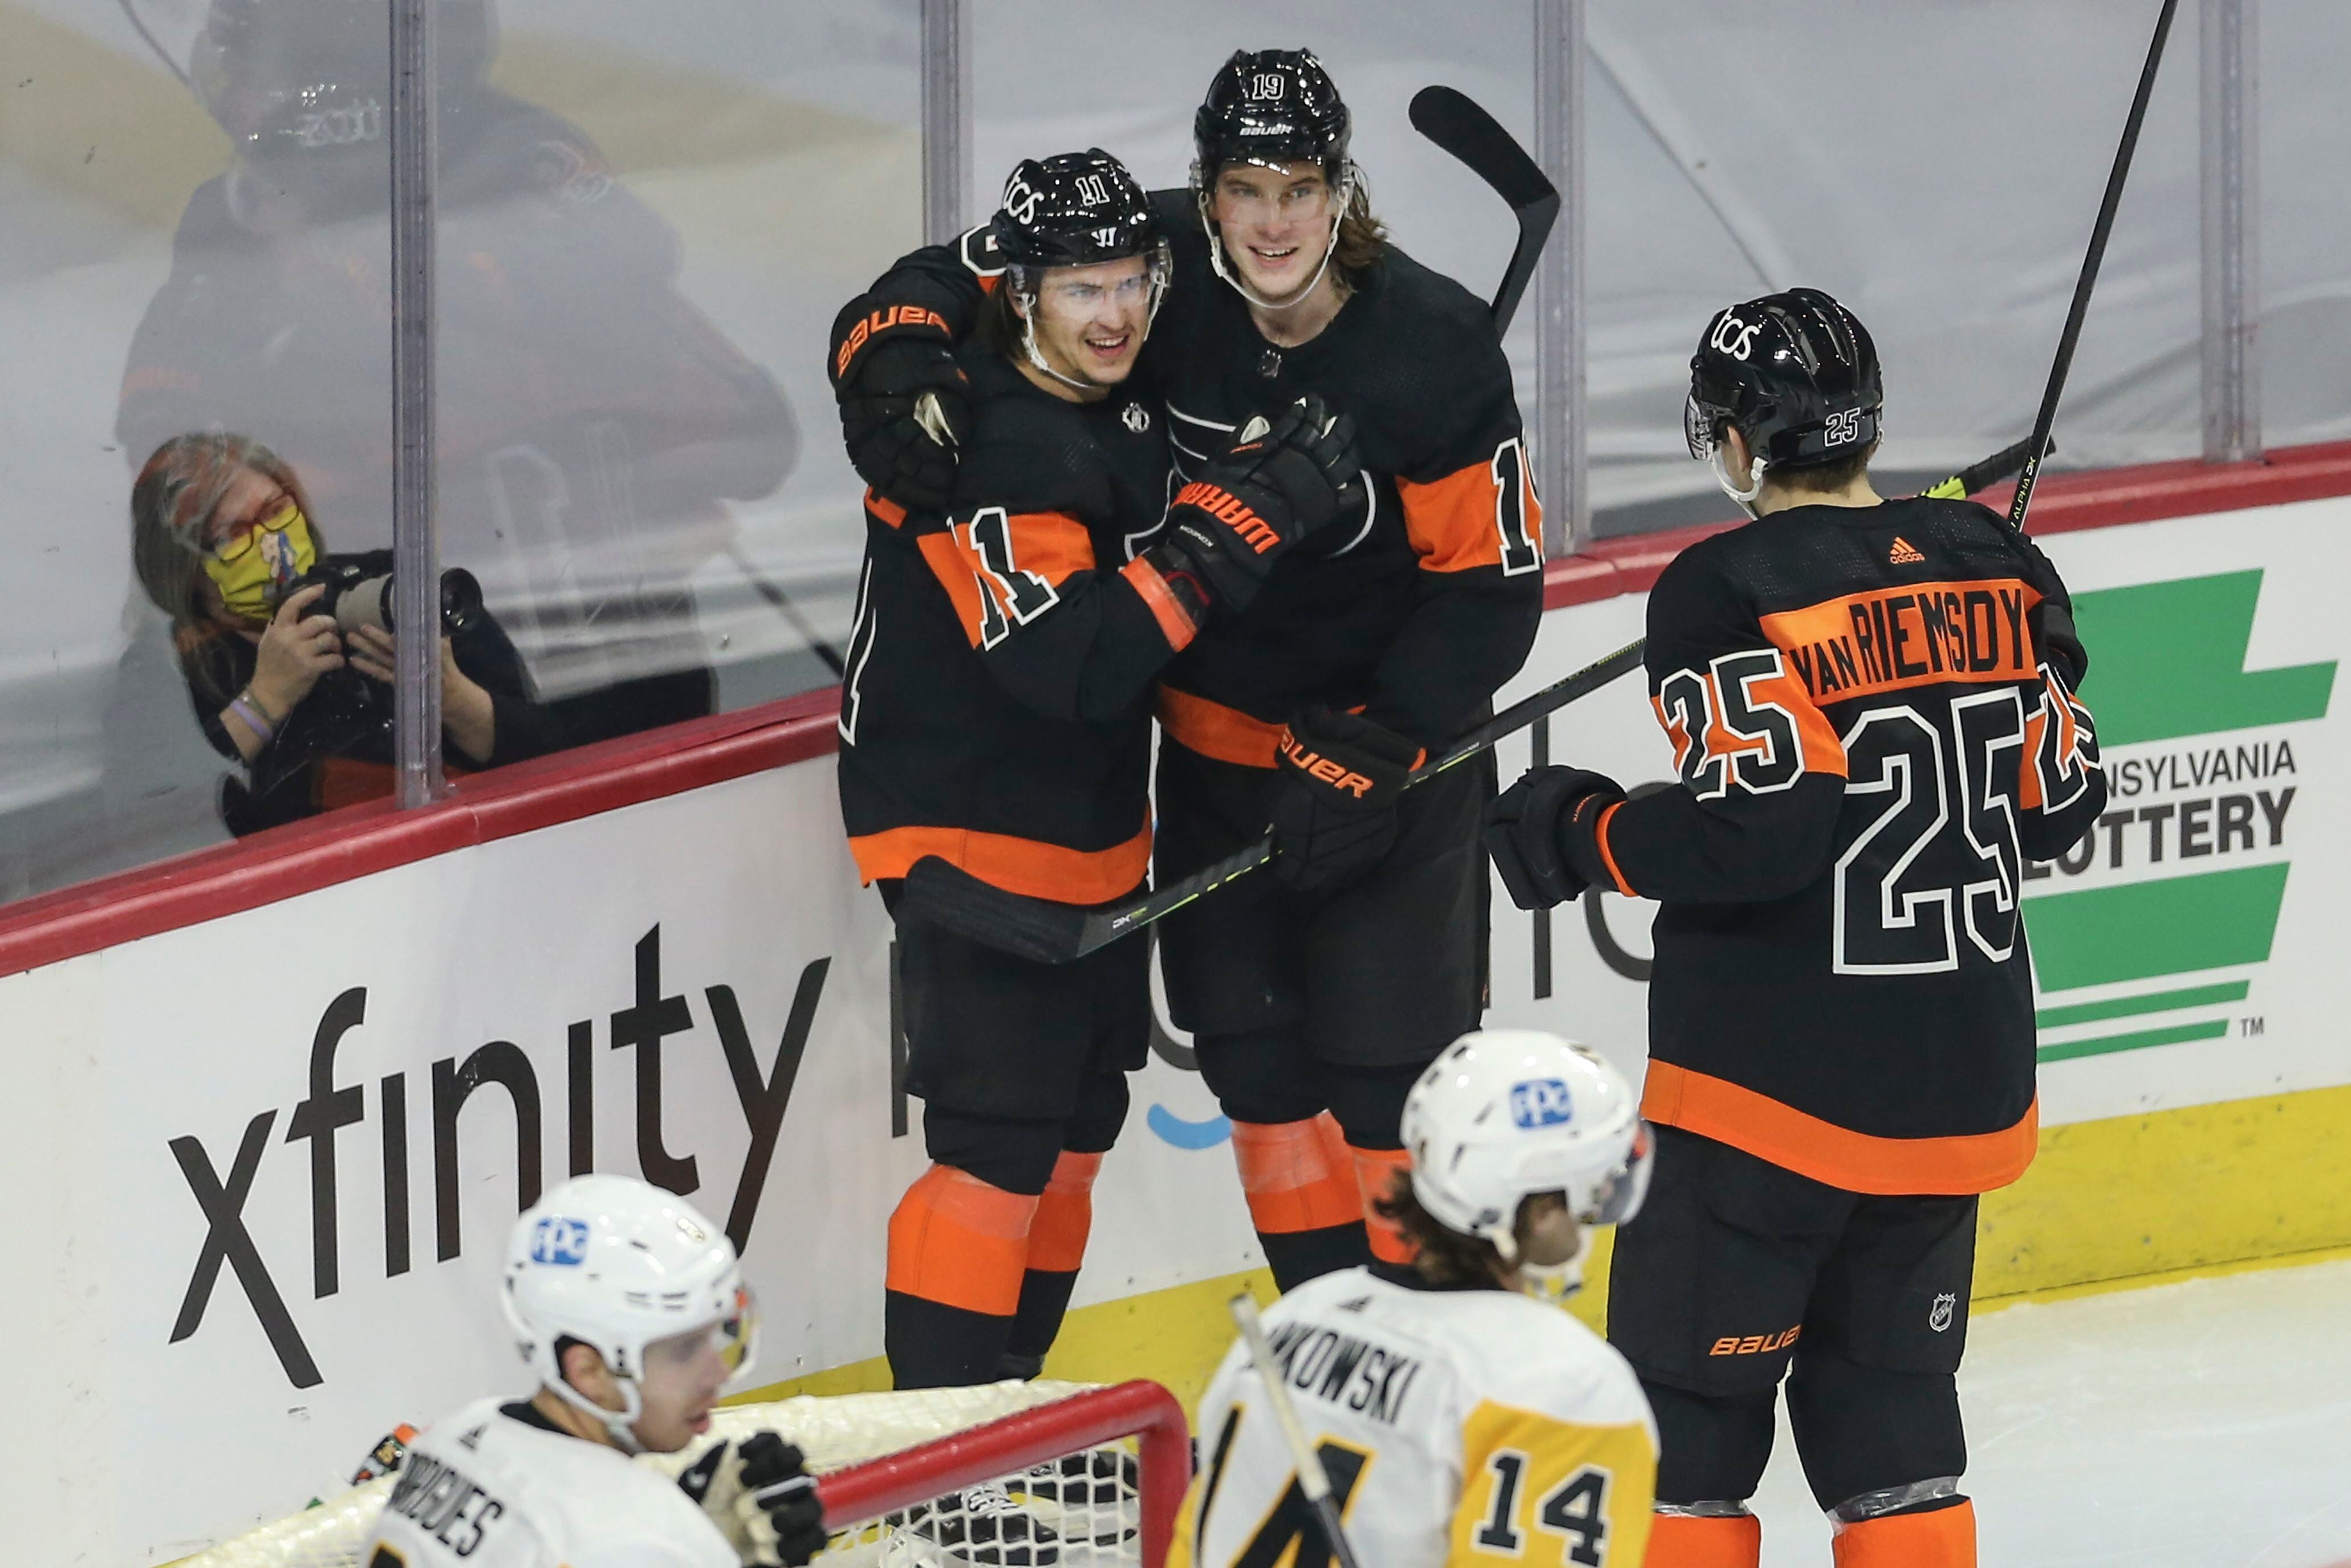 Konecny joins Hart as an untouchable on the Flyers' roster